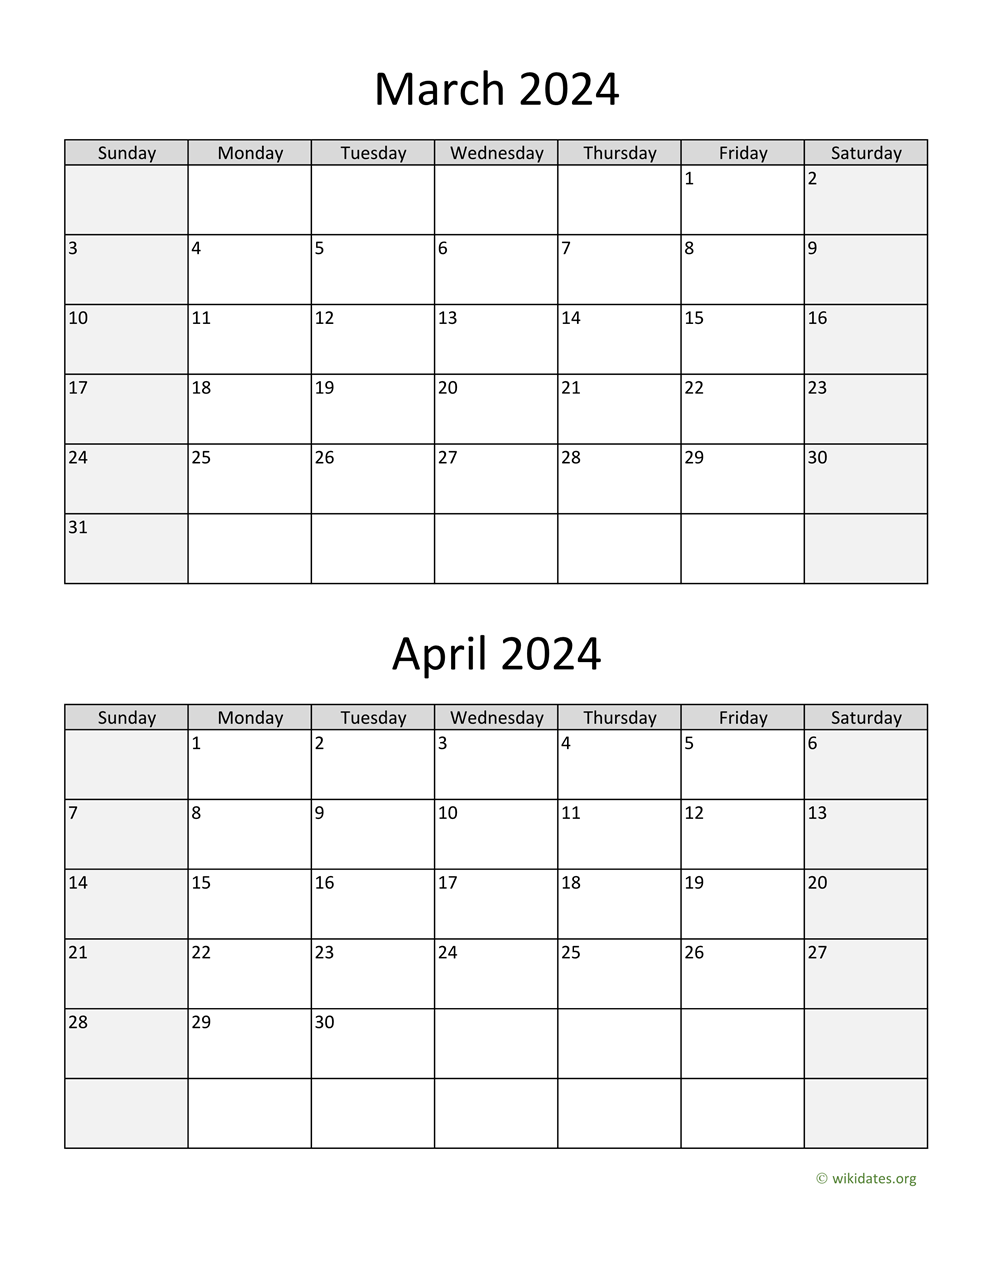 March And April 2024 Calendar | Wikidates for Printable March And April 2024 Calendar